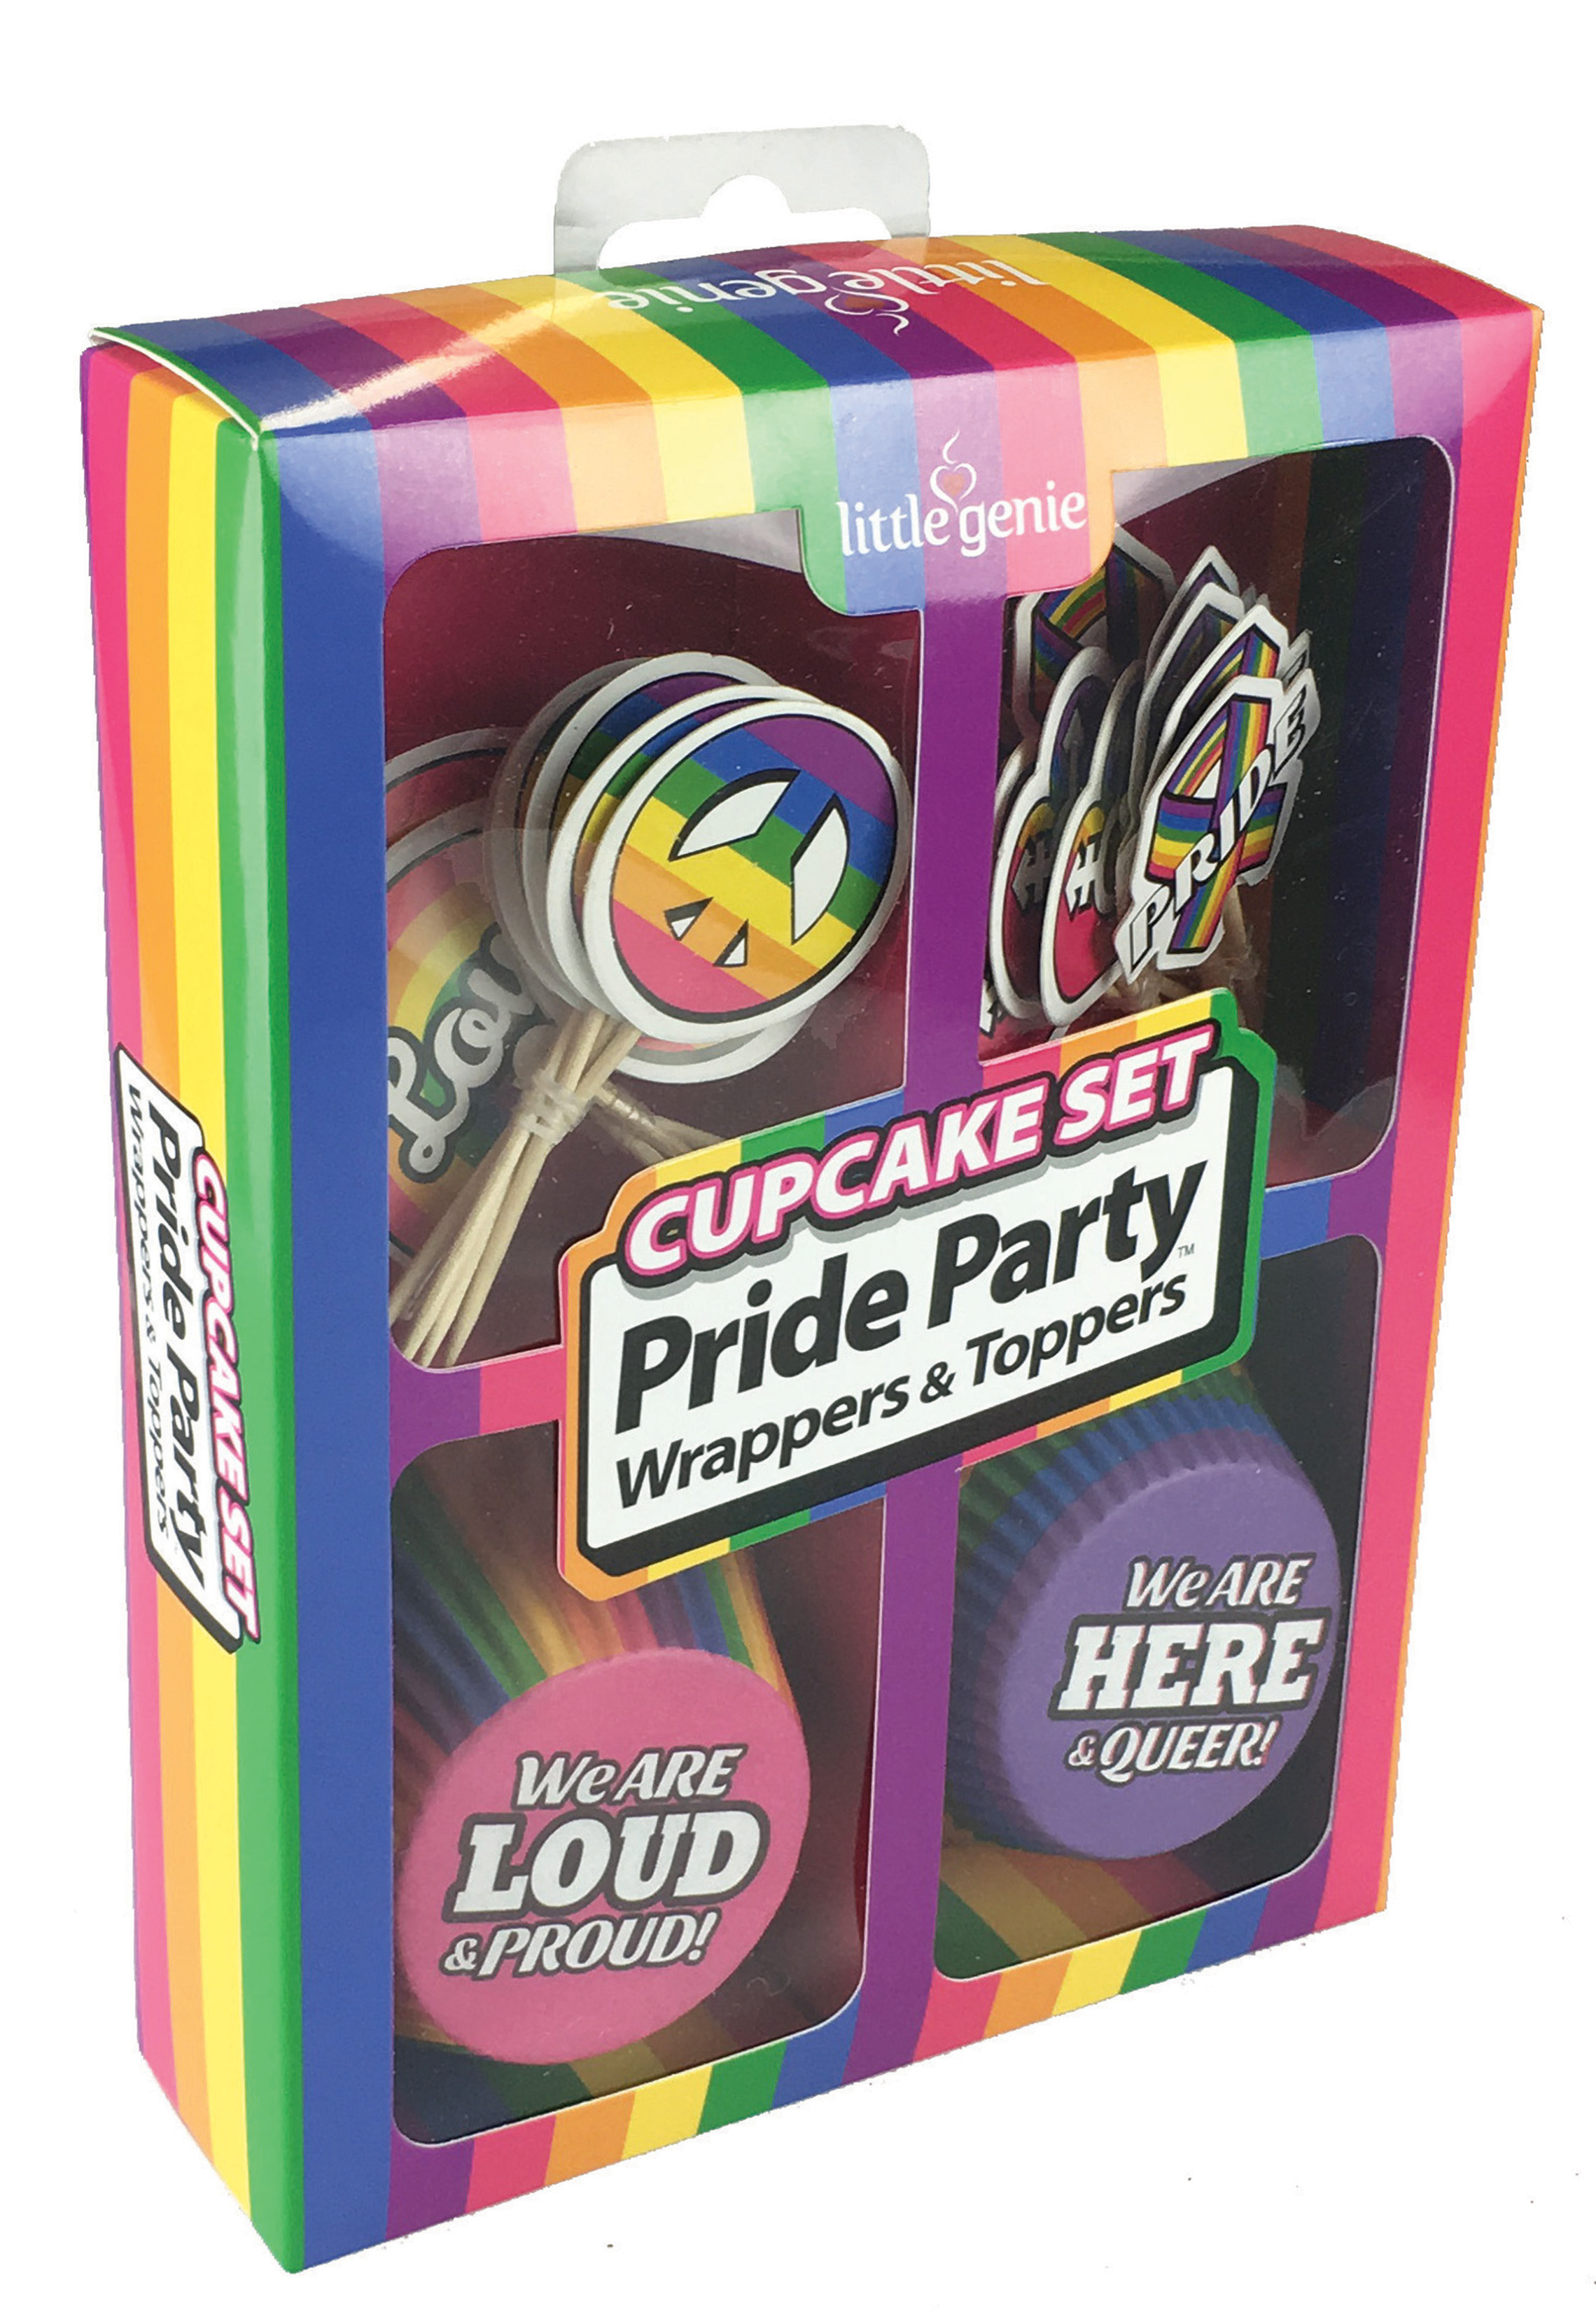 Cupcake Set - Pride Party Wrappers & Toppers